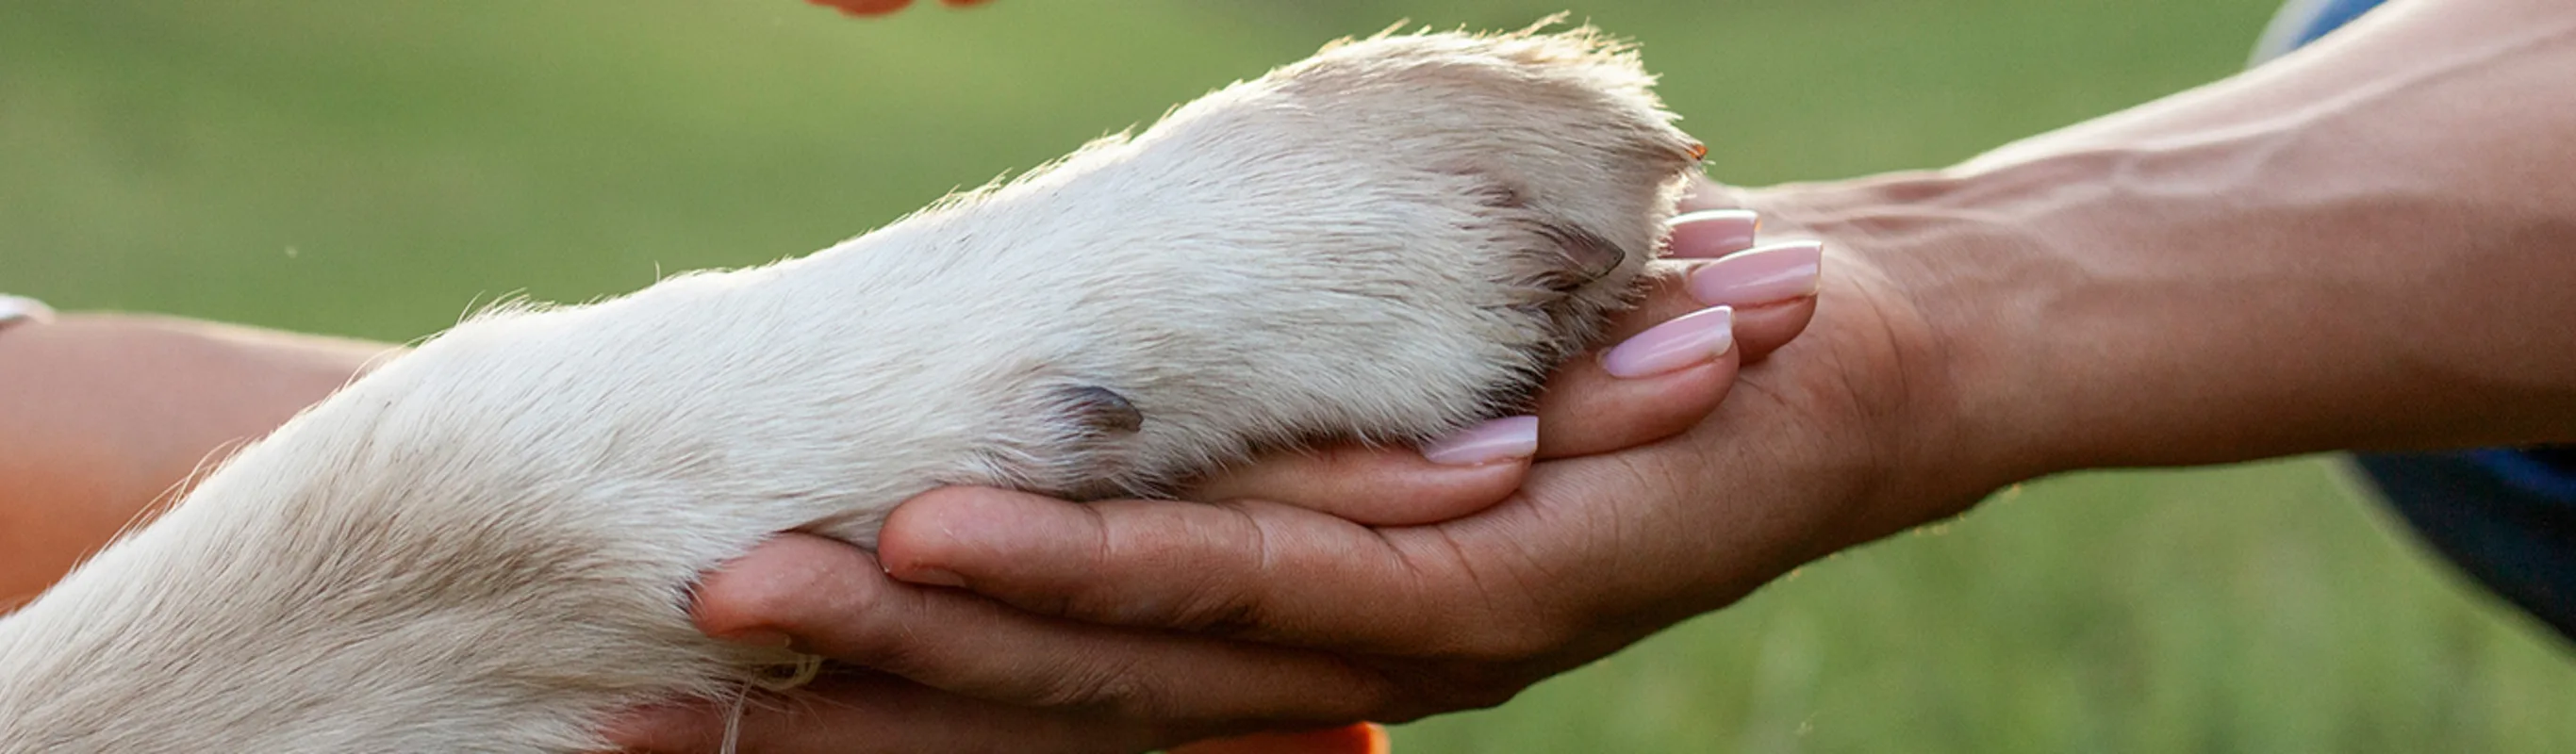 A person holding a dog's paw